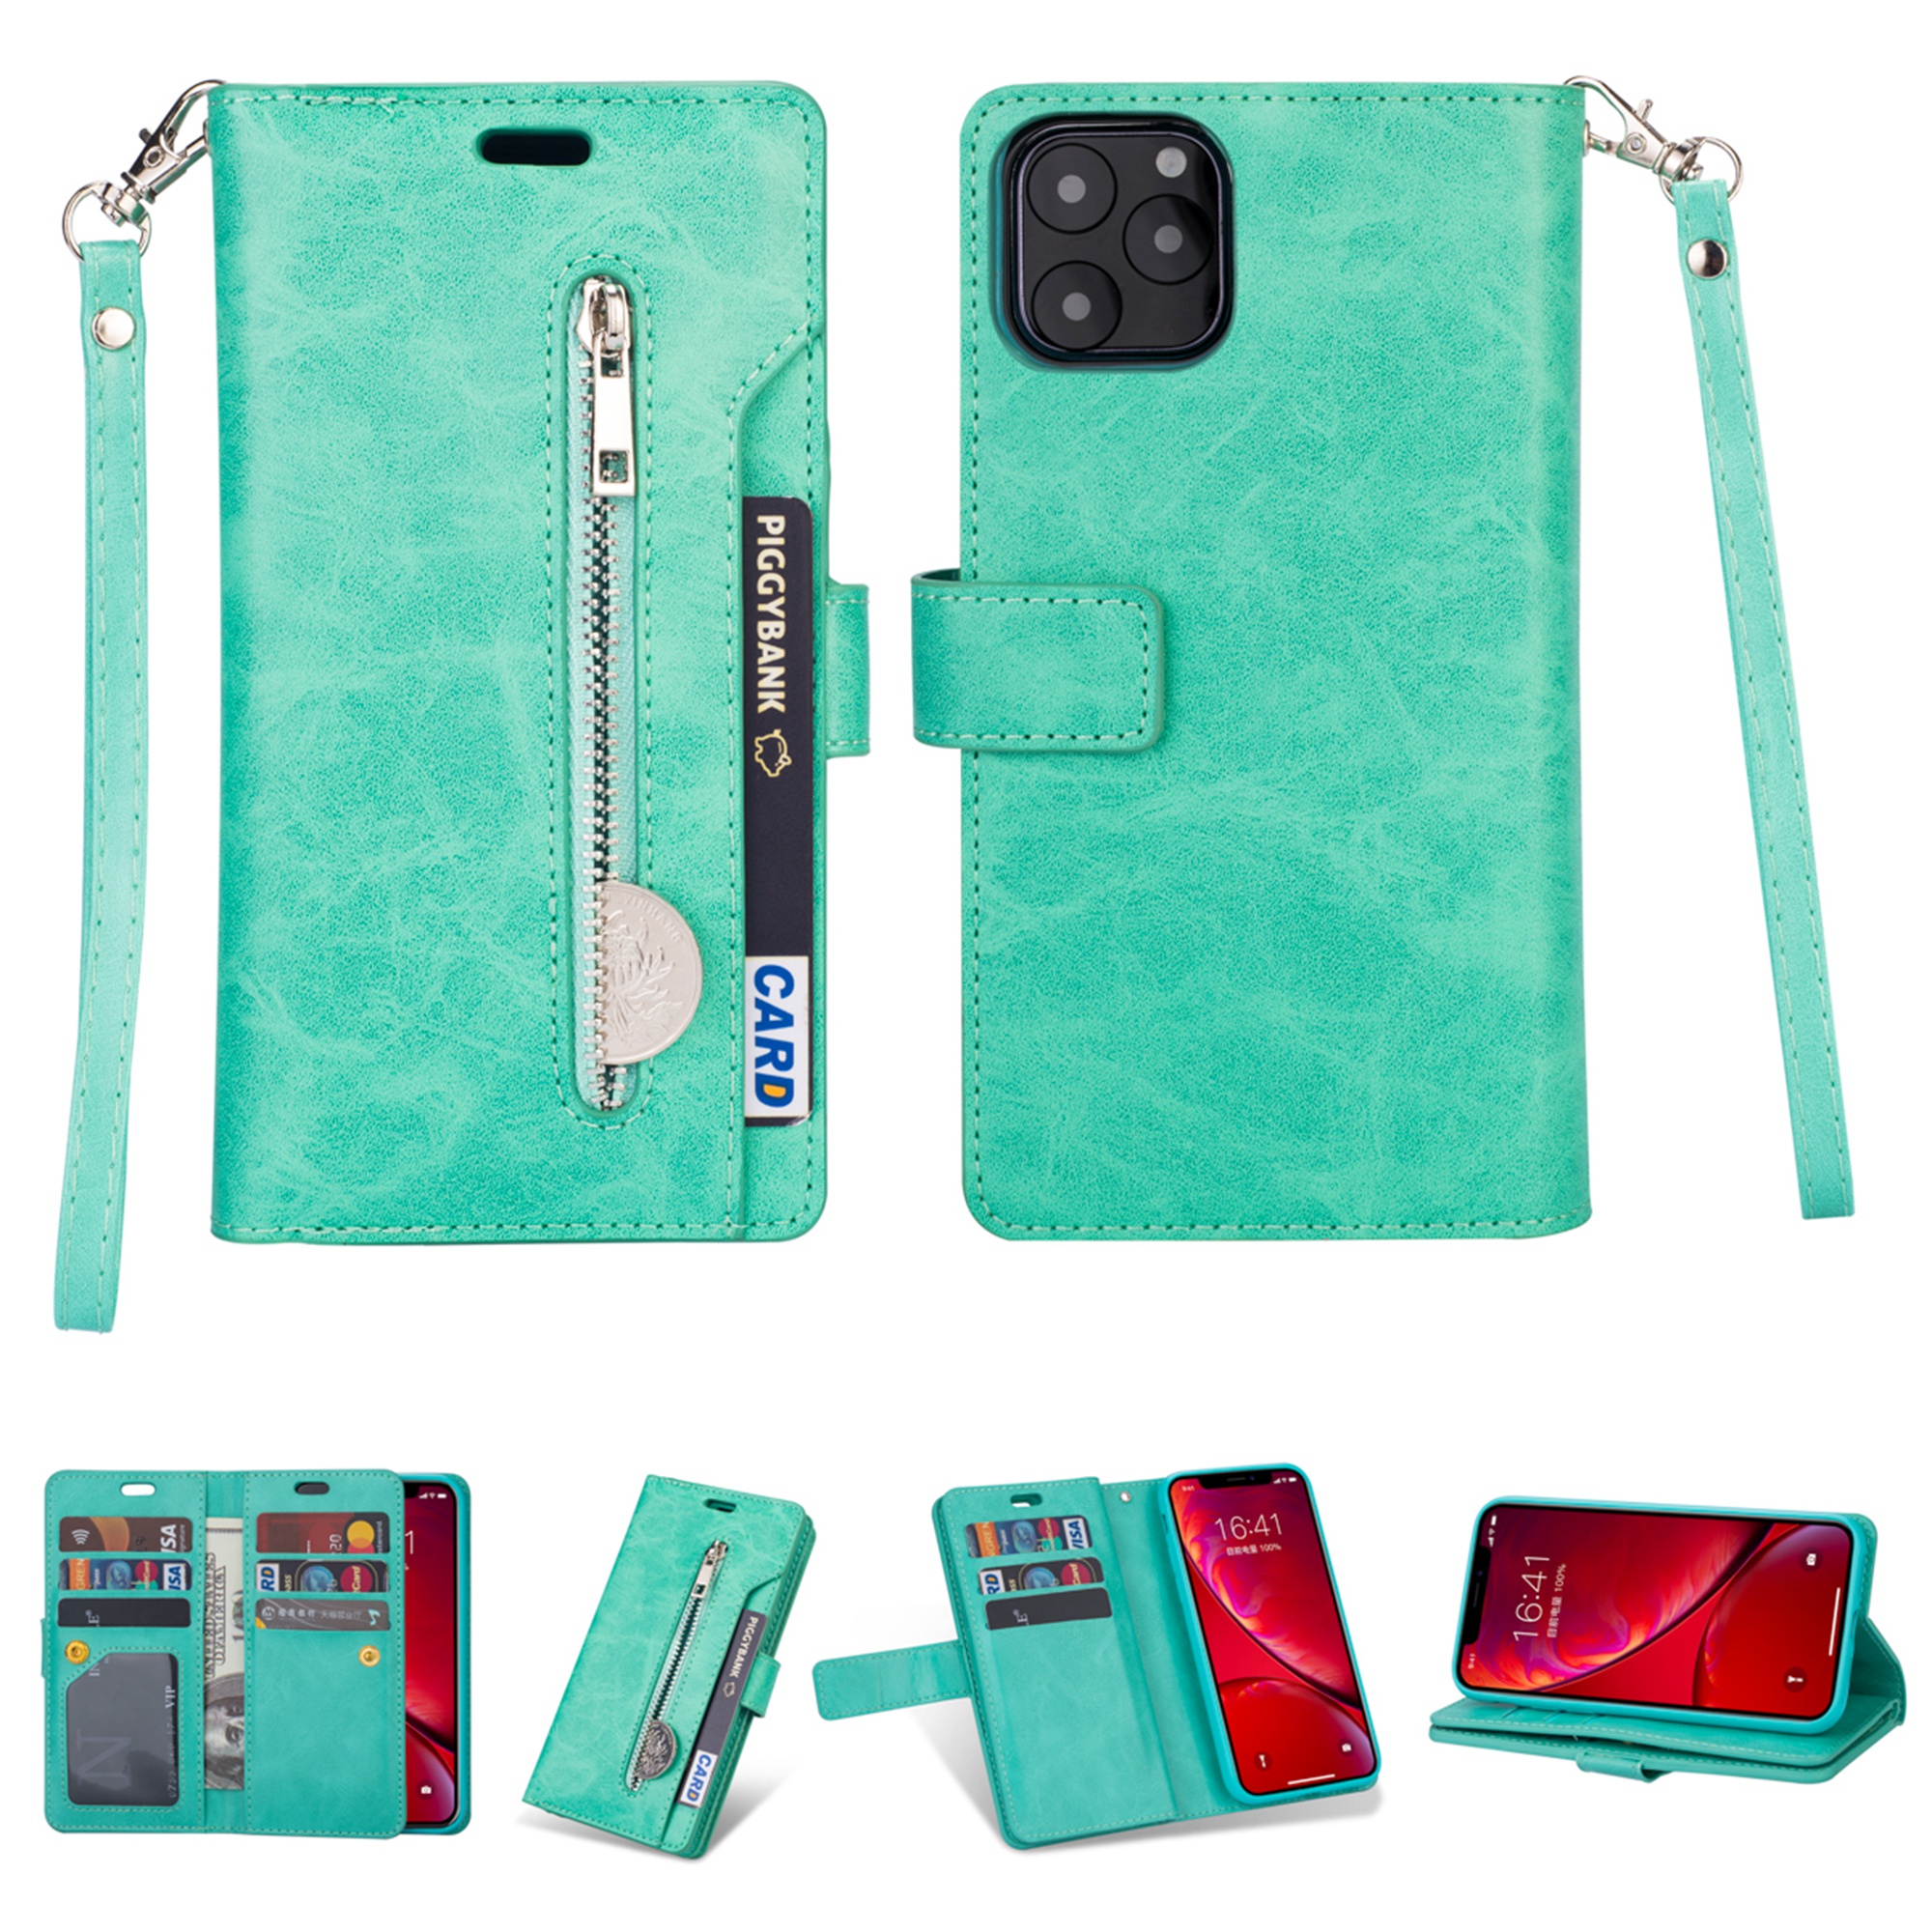 iPhone 11 Pro Max 6.5 inch Wallet Case, Dteck 9 Card Slots Premium Leather Zipper Purse case Flip Kickstand Folio Magnetic with Wrist Strap Credit Cash Cover For Apple iPhone 11 Pro Max, Mint - image 1 of 7